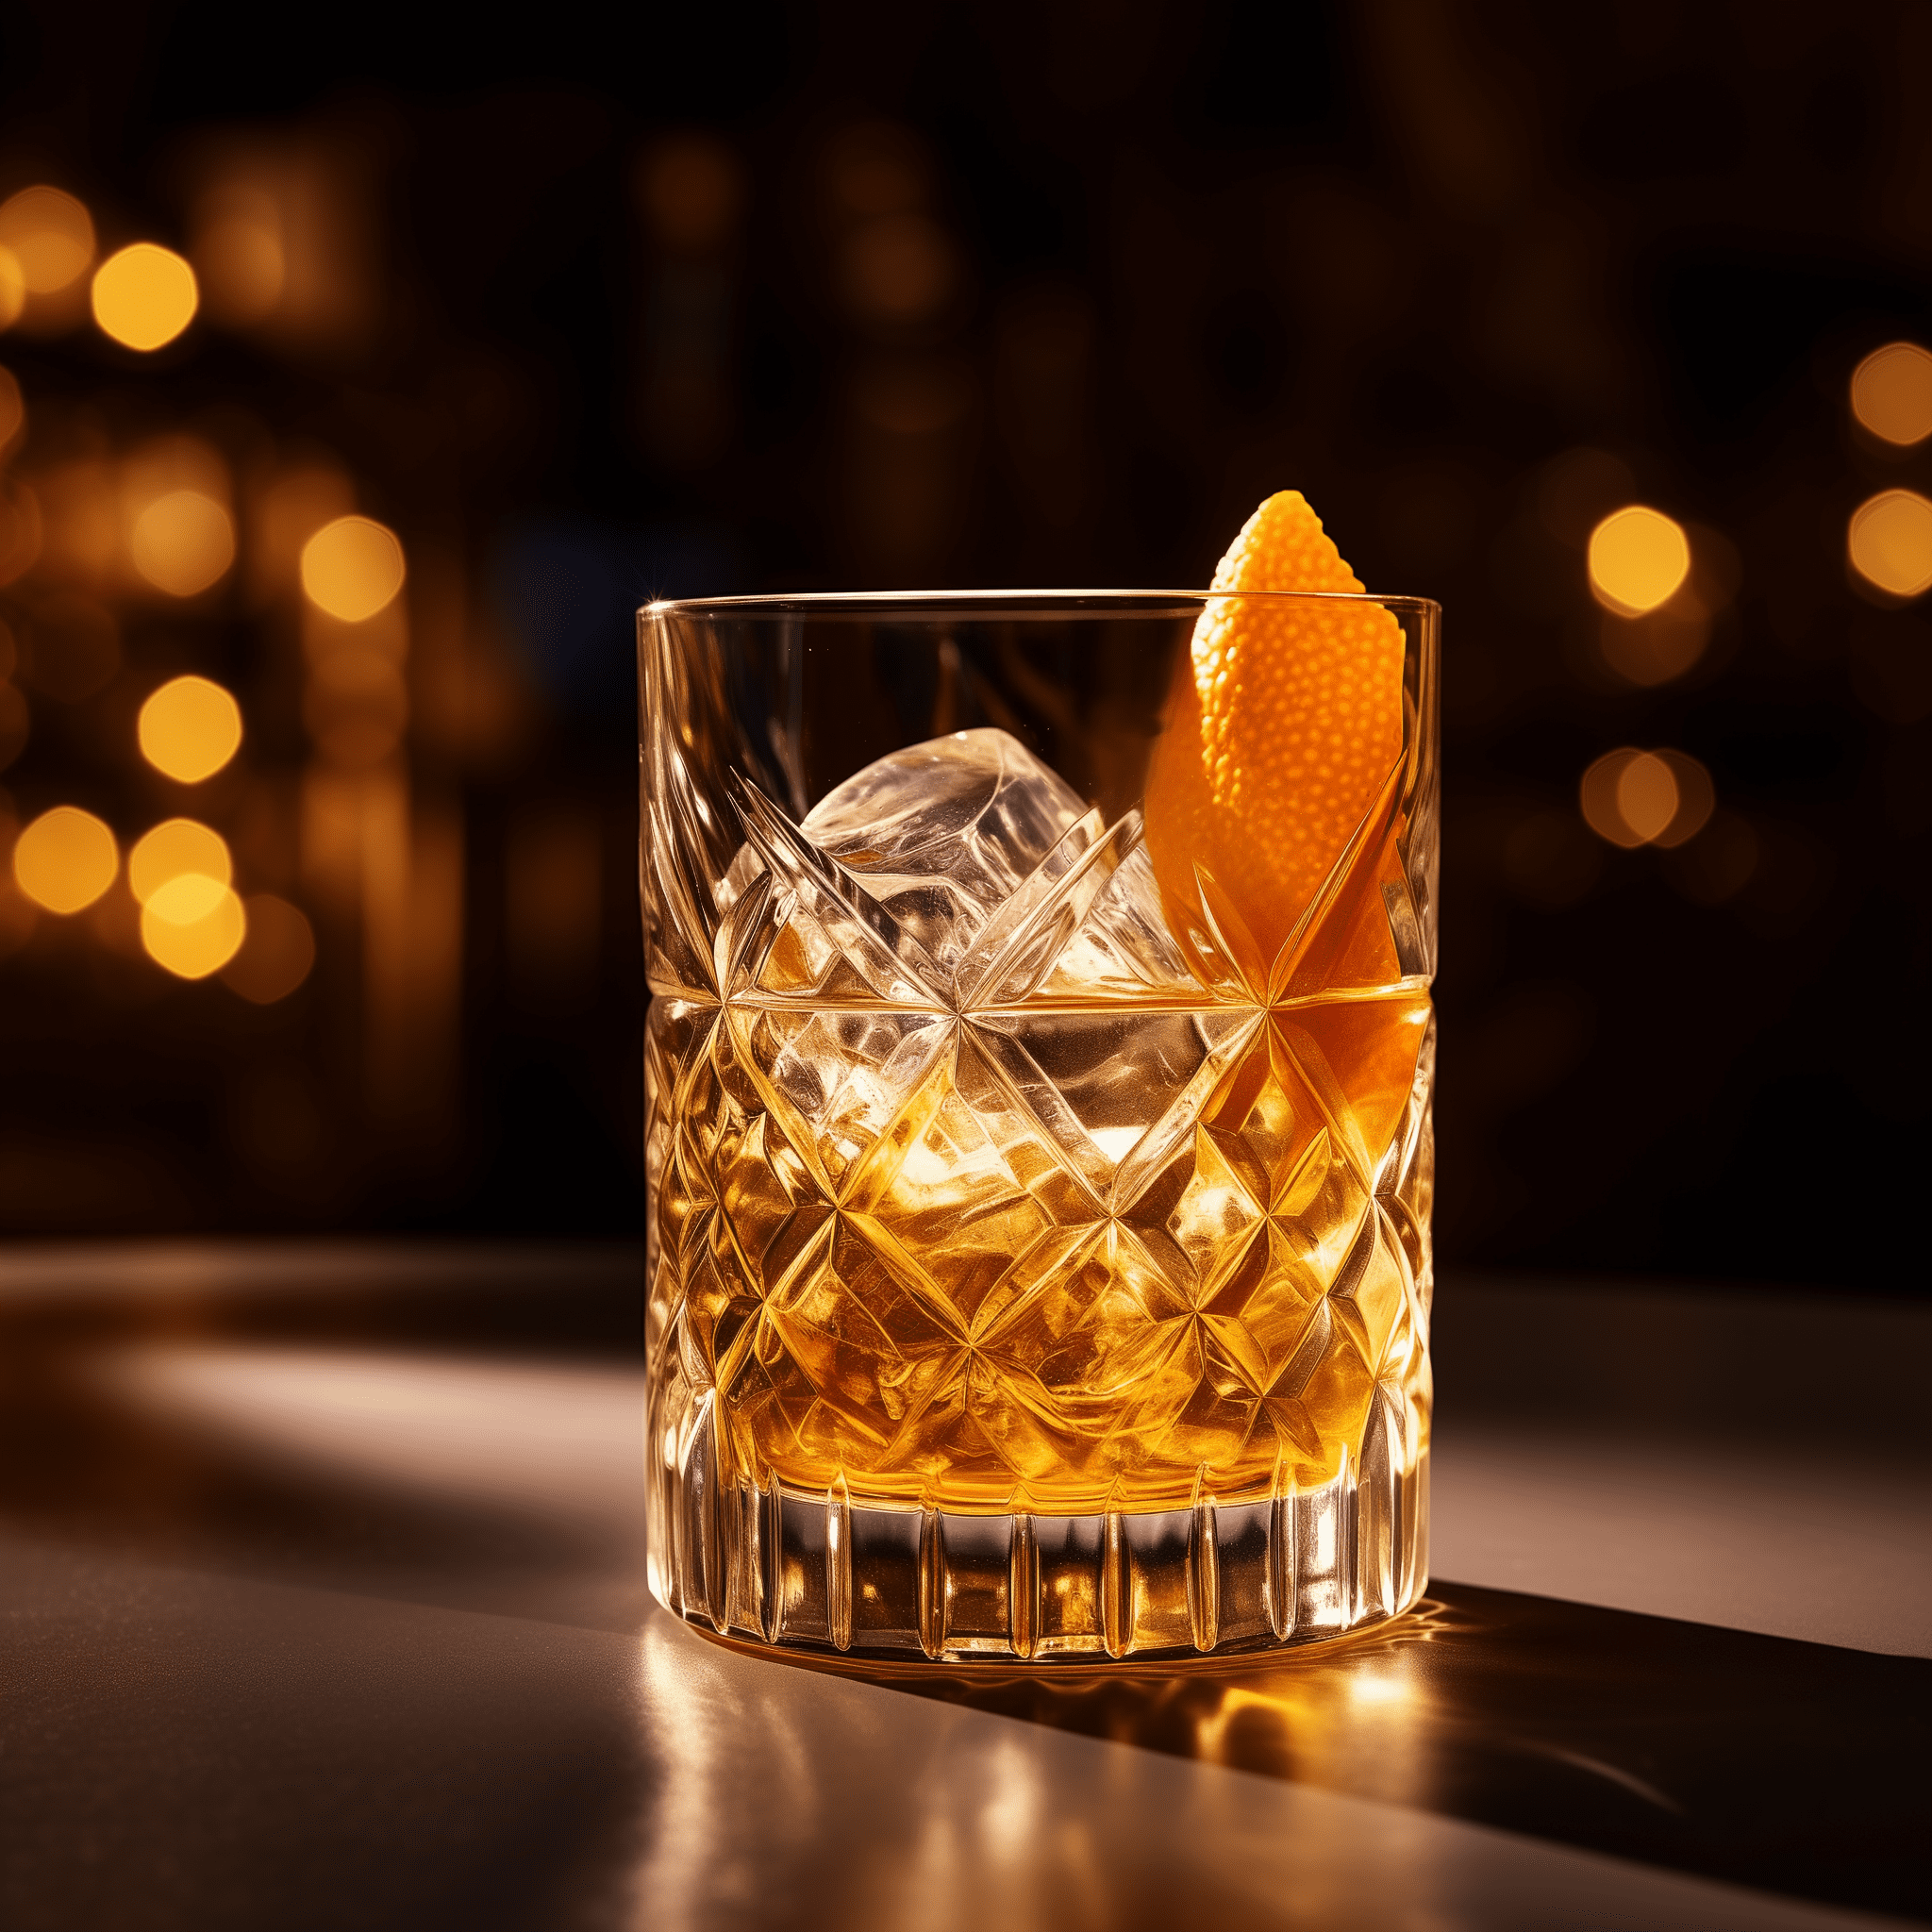 The Italian Old Fashioned has a complex taste profile. It's bittersweet with herbal undertones from the Amaro, the whiskey provides warmth and depth, and the Prosecco adds a light, bubbly finish.